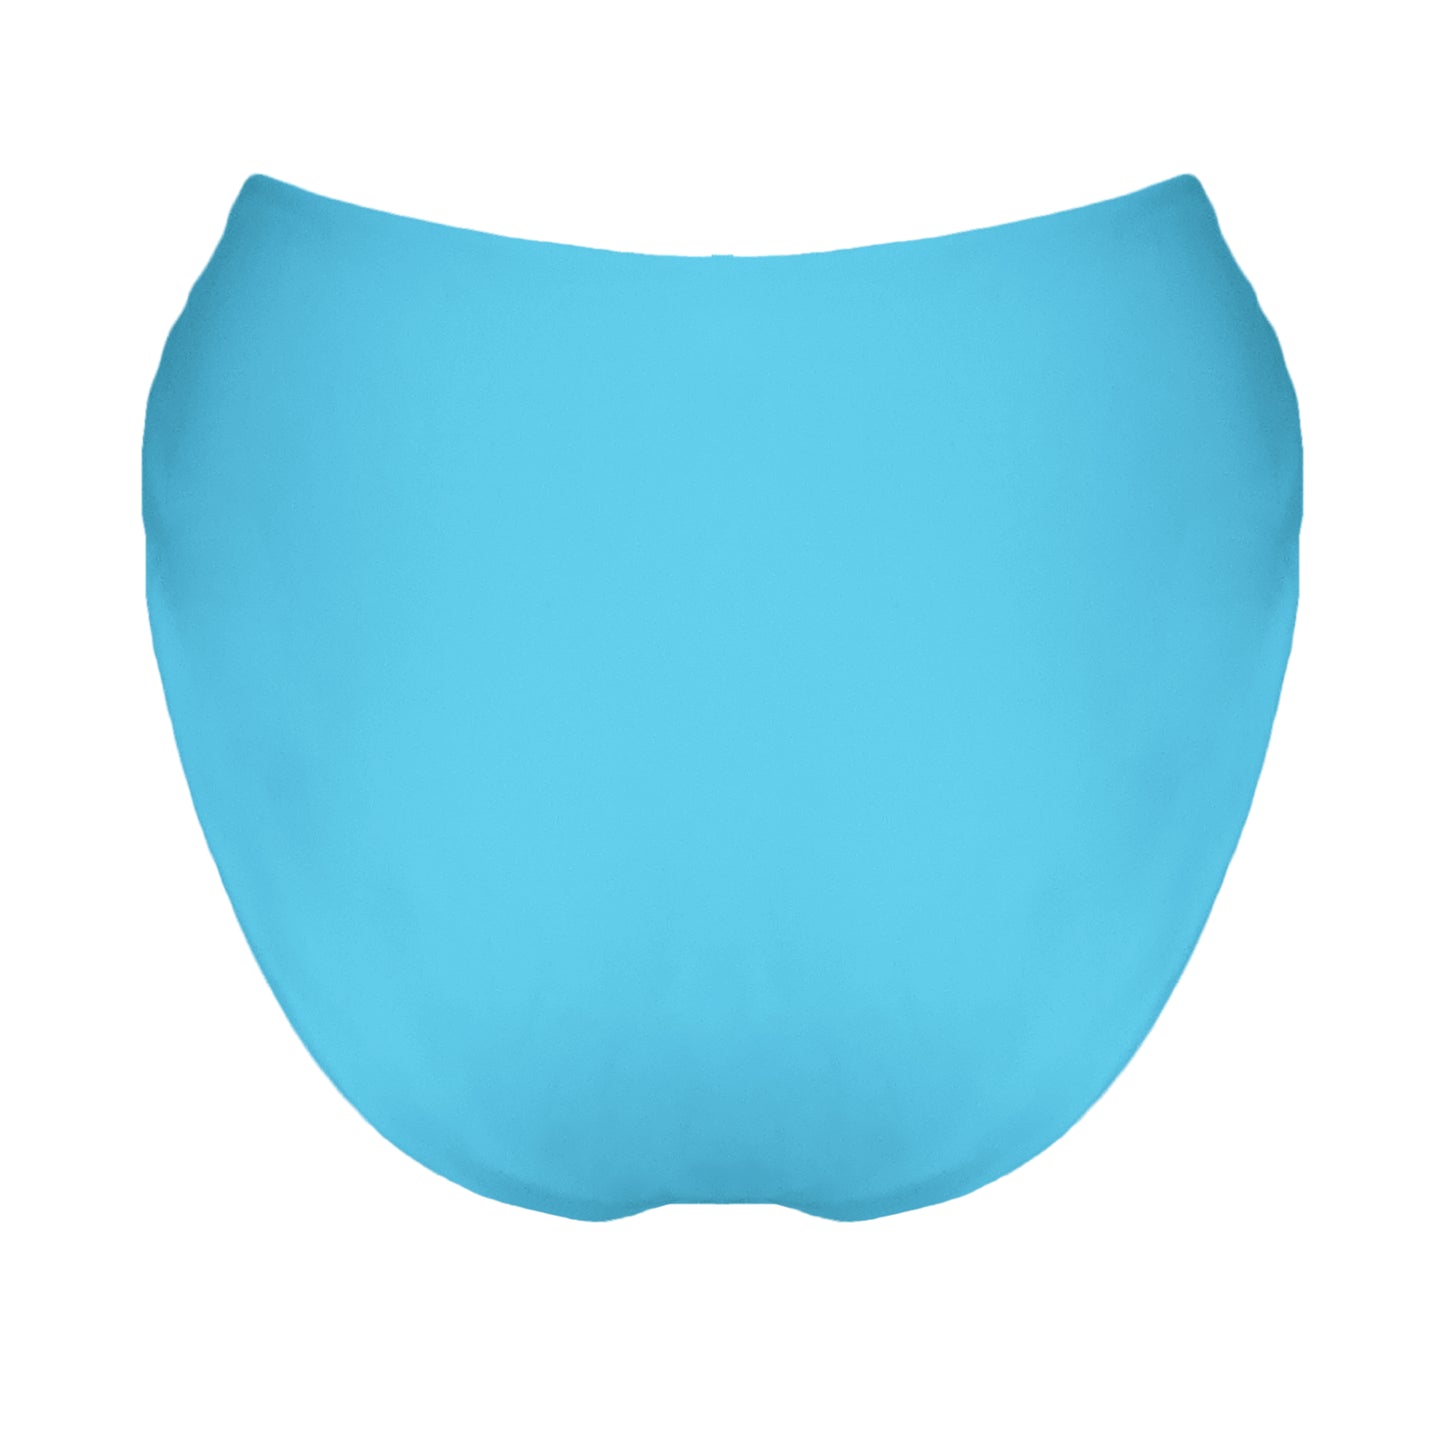 Back view of acqua blue V-front mid rise bikini bottom with high cut sides and cheeky coverage.